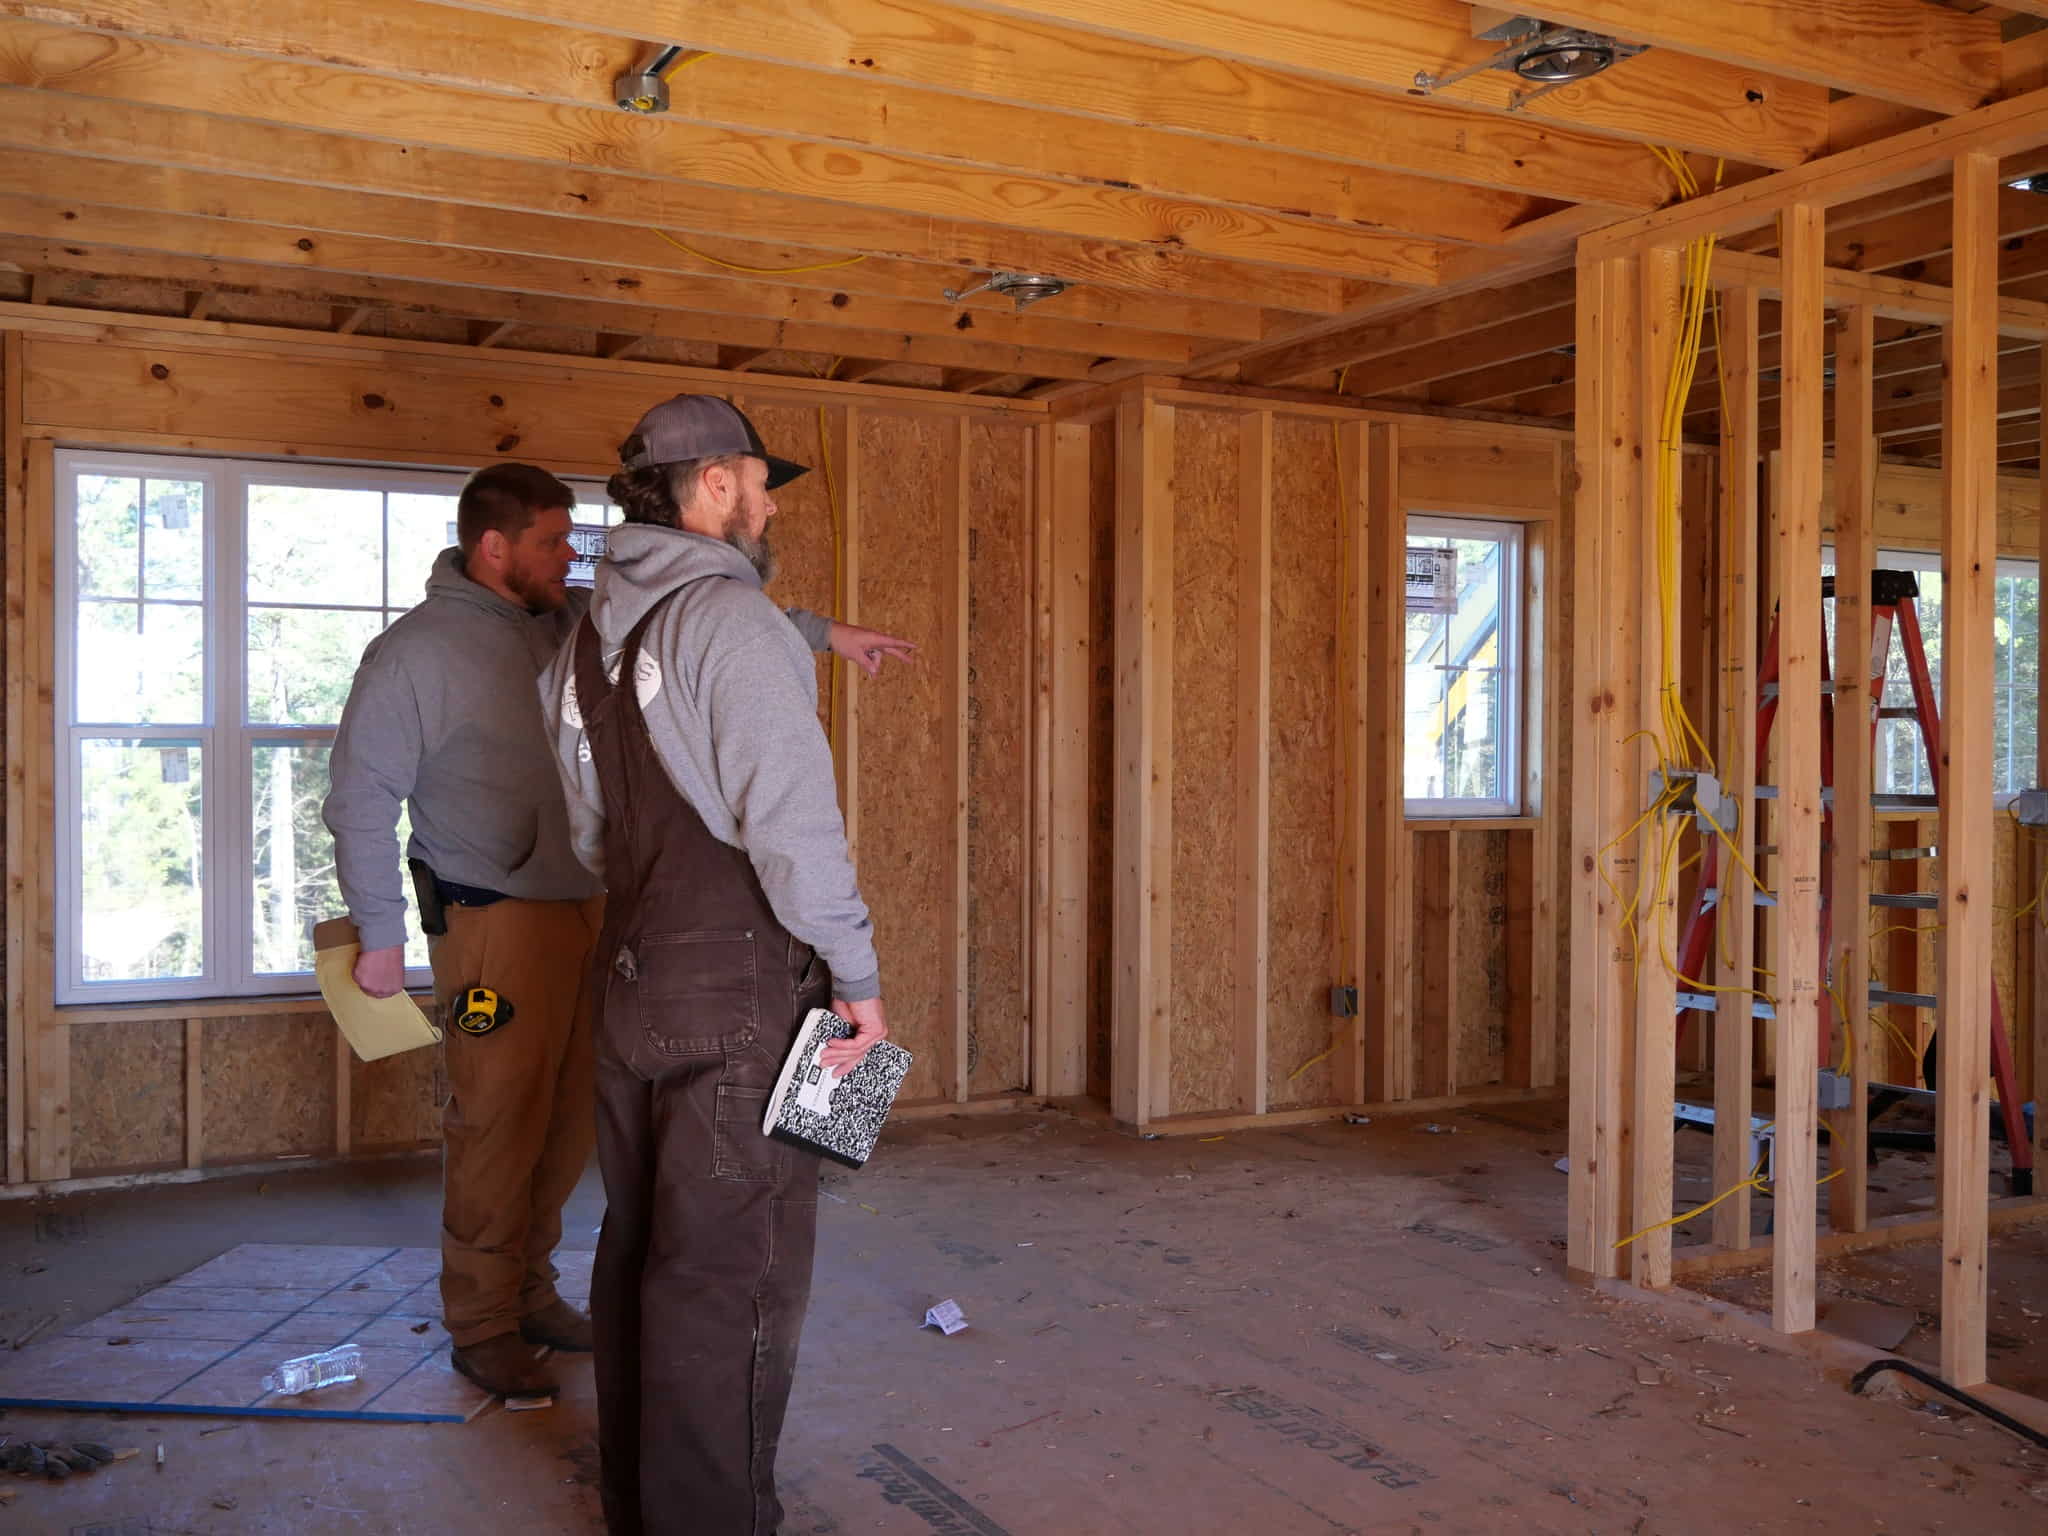 Burris Heat & Air workers discussing their plans inside a residential house during construction.